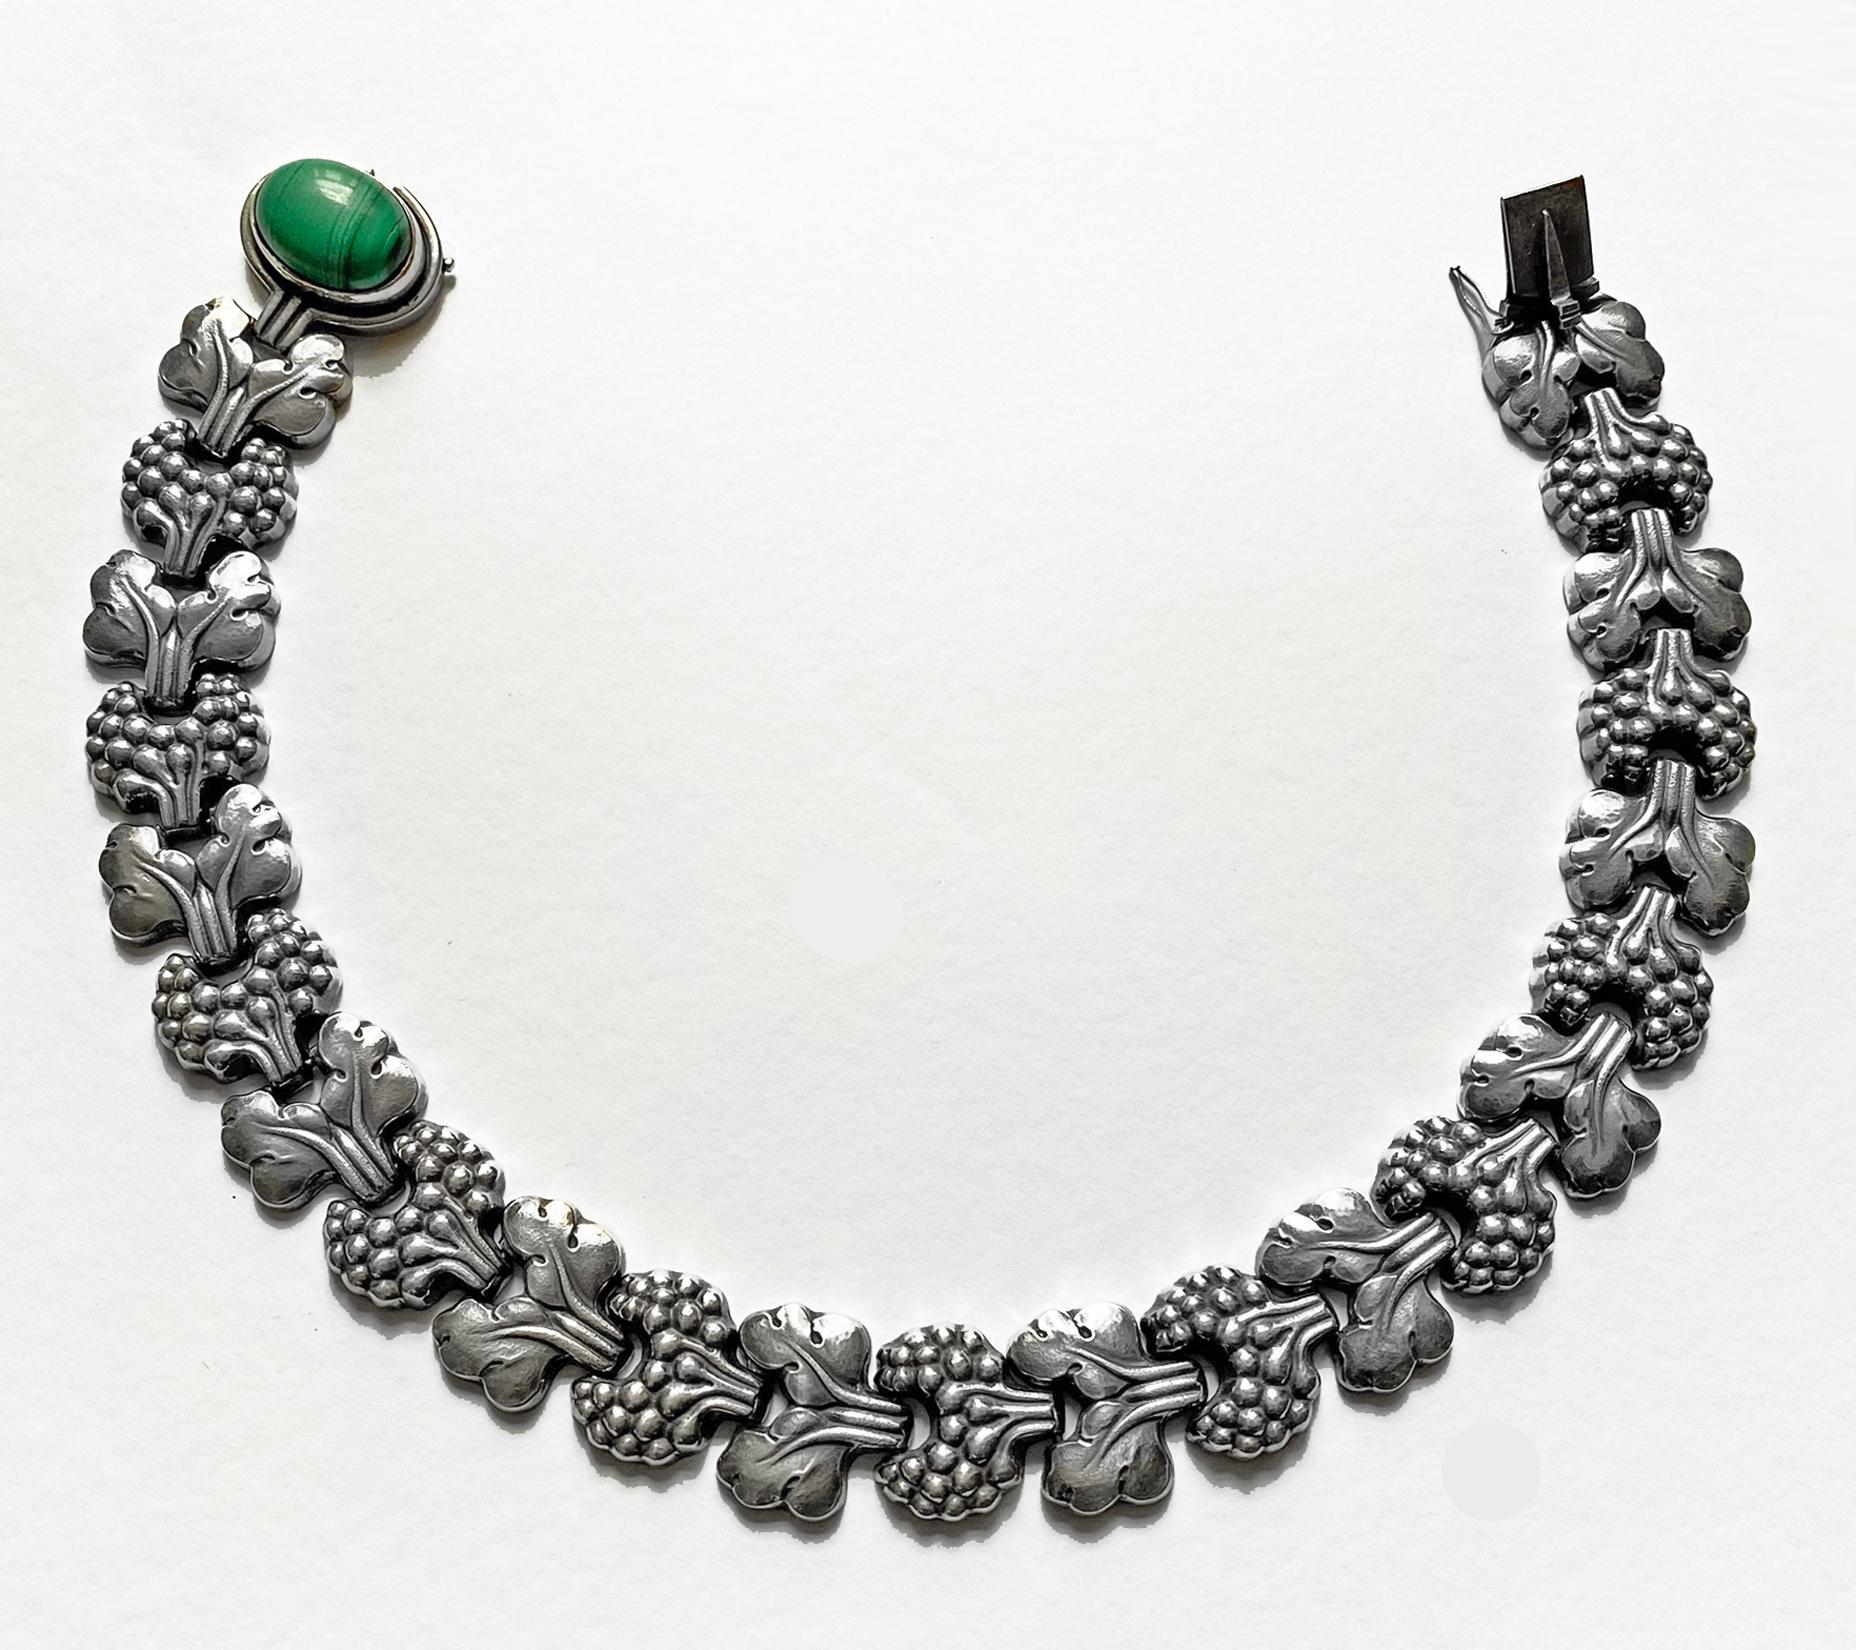 An extremely Rare Georg Jensen Sterling Silver PARIS Necklace No 30, Denmark C.1945. Set with a large oval cabochon Malachite stone. A similar example bracelet with amber is featured in Drucker reference Georg Jensen , A Tradition of Splendid